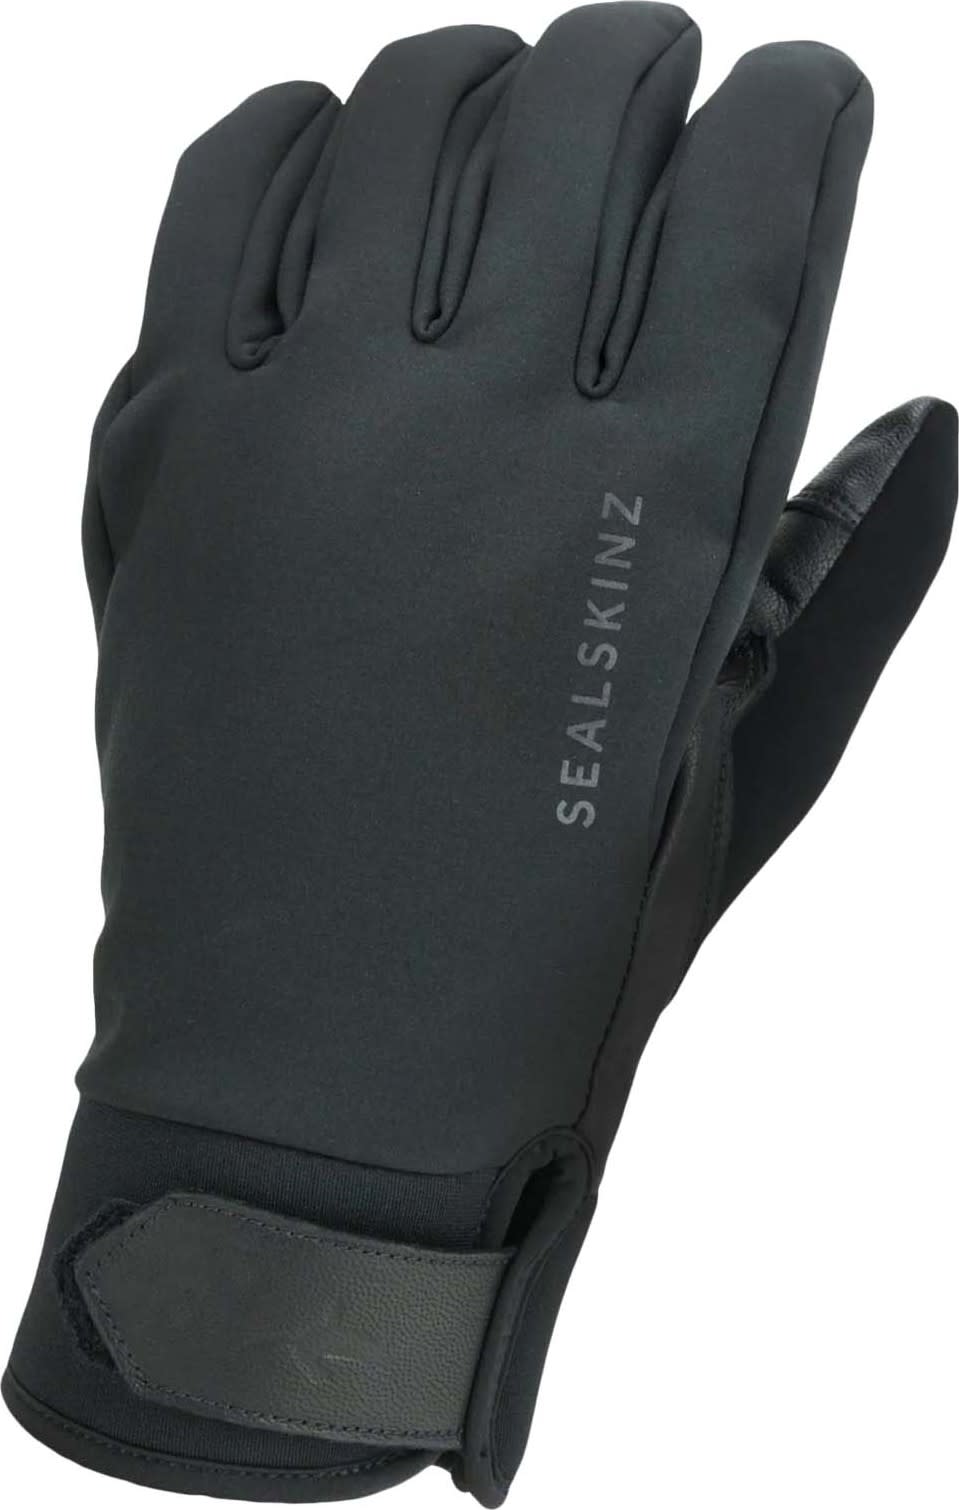 Waterproof All Weather Insulated Glove Black